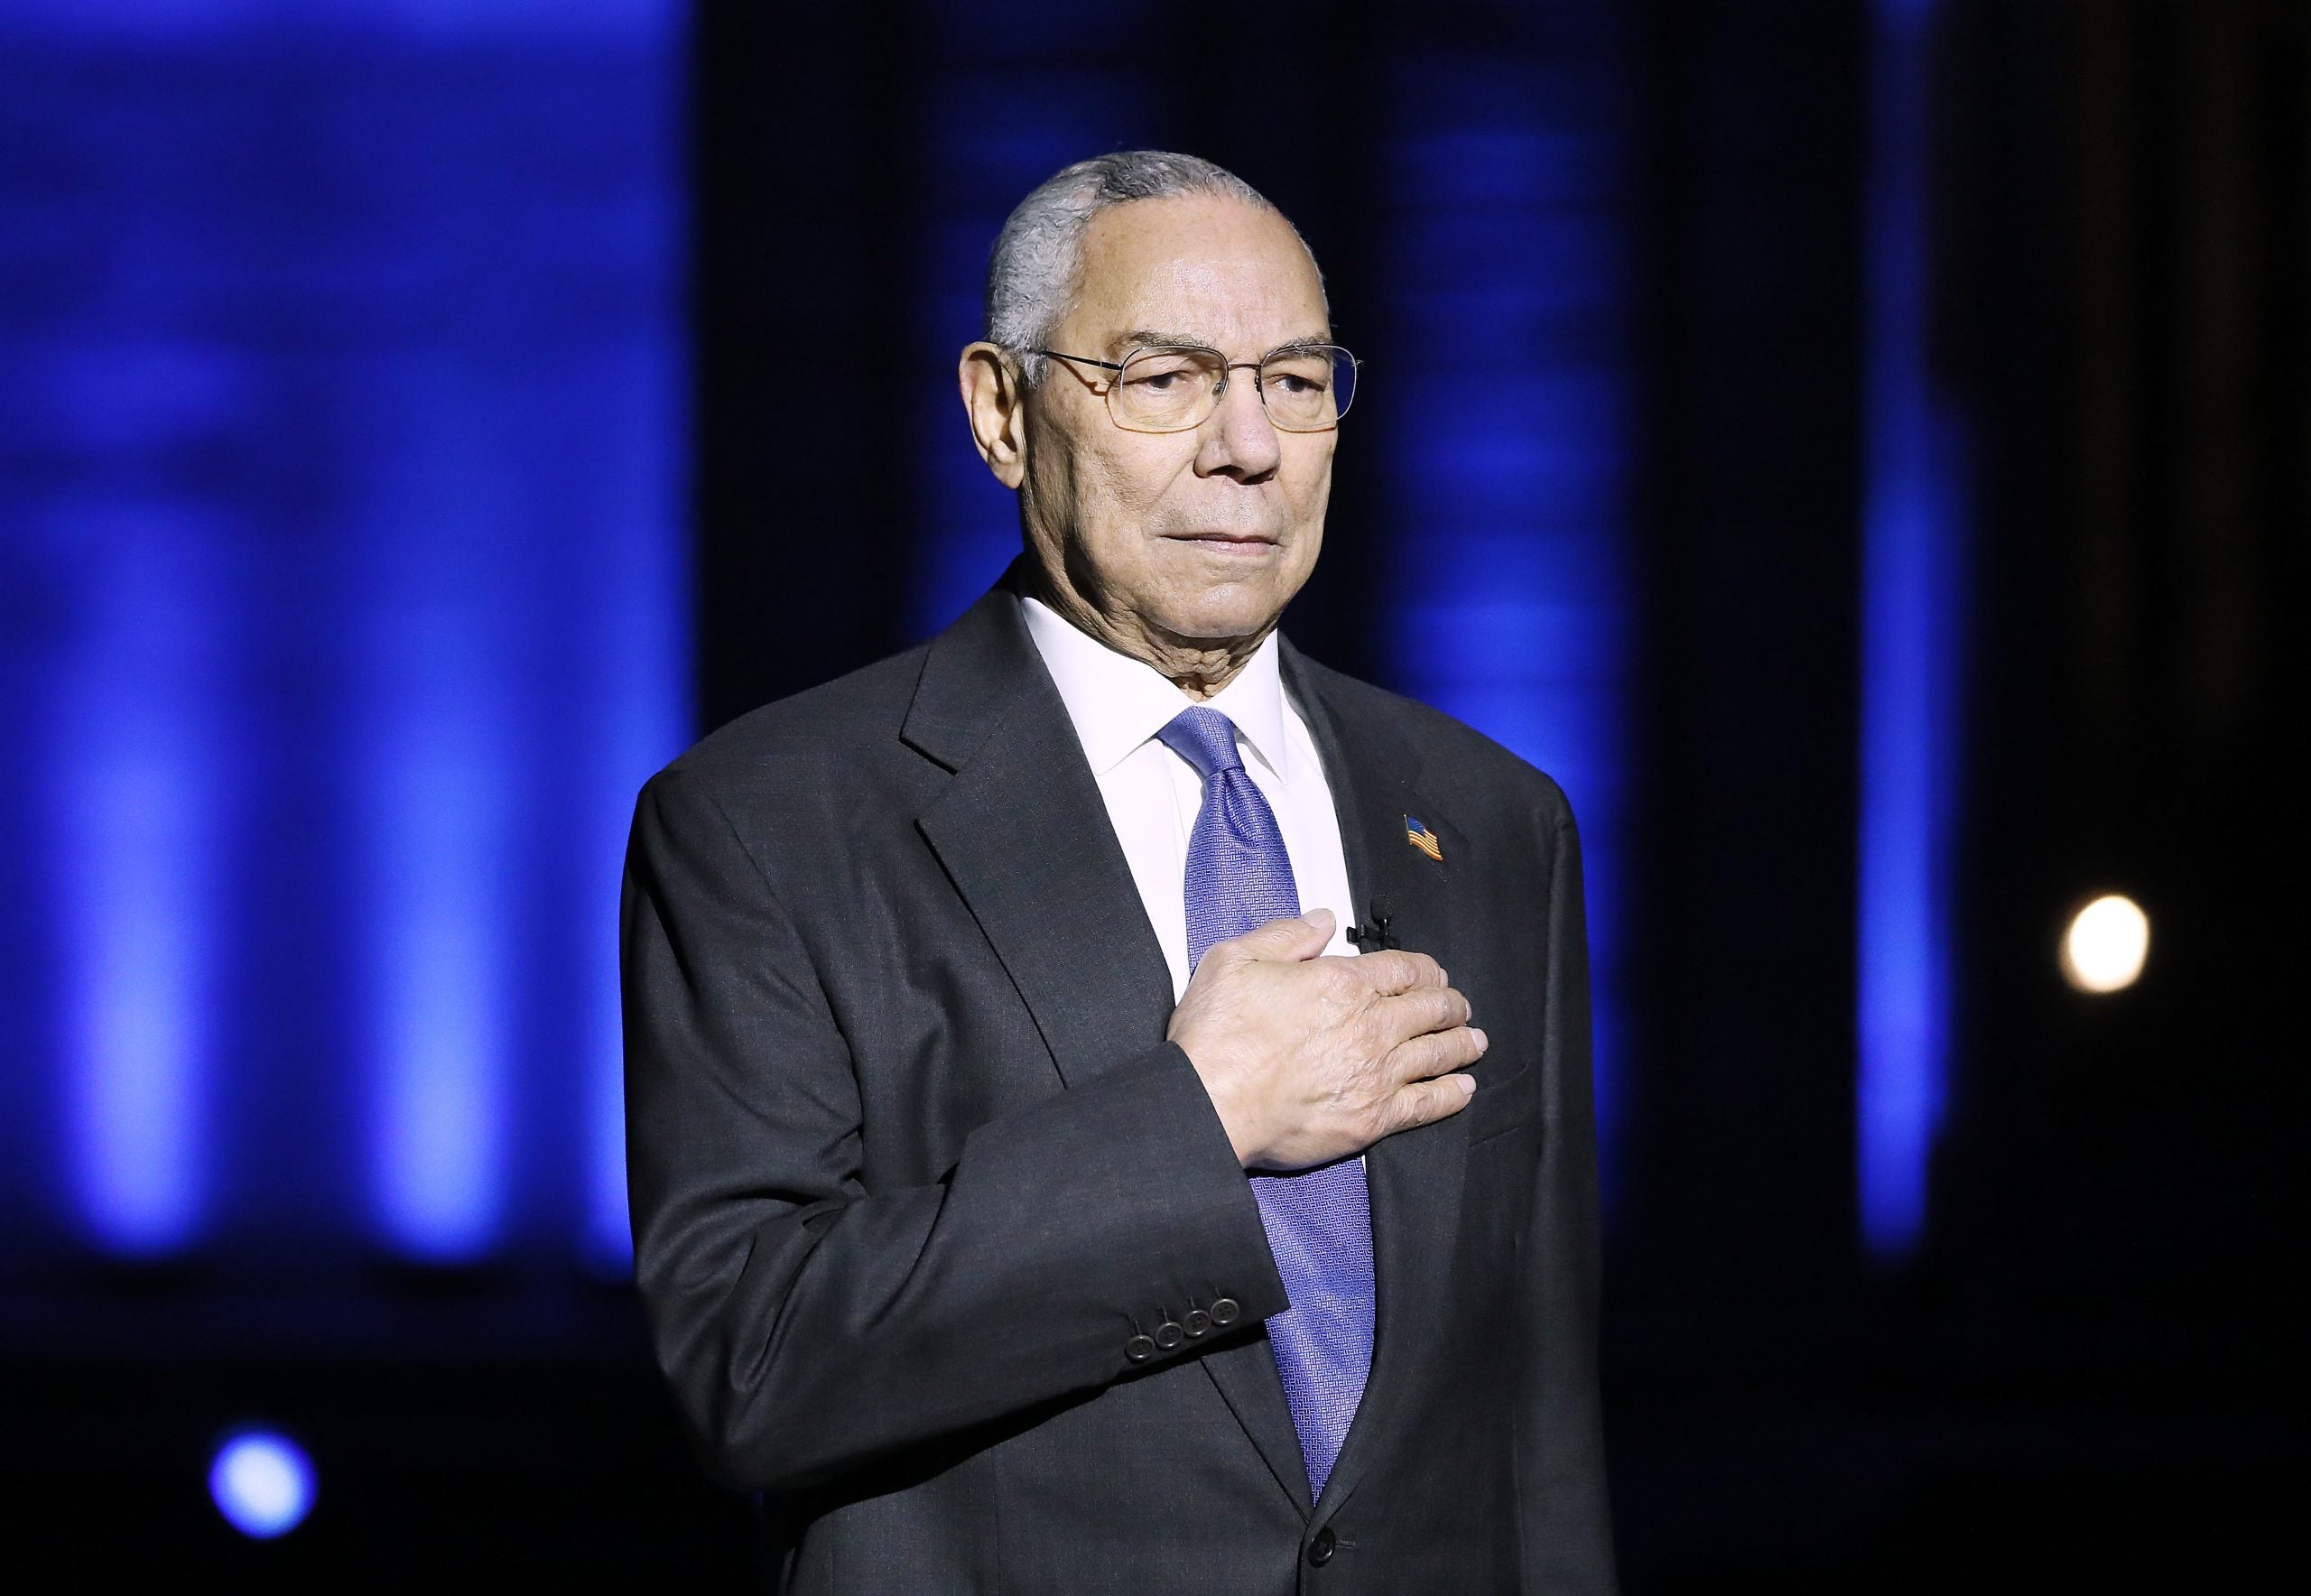 Military Leader Colin Powell Dies At 84 From COVID-19 Complications